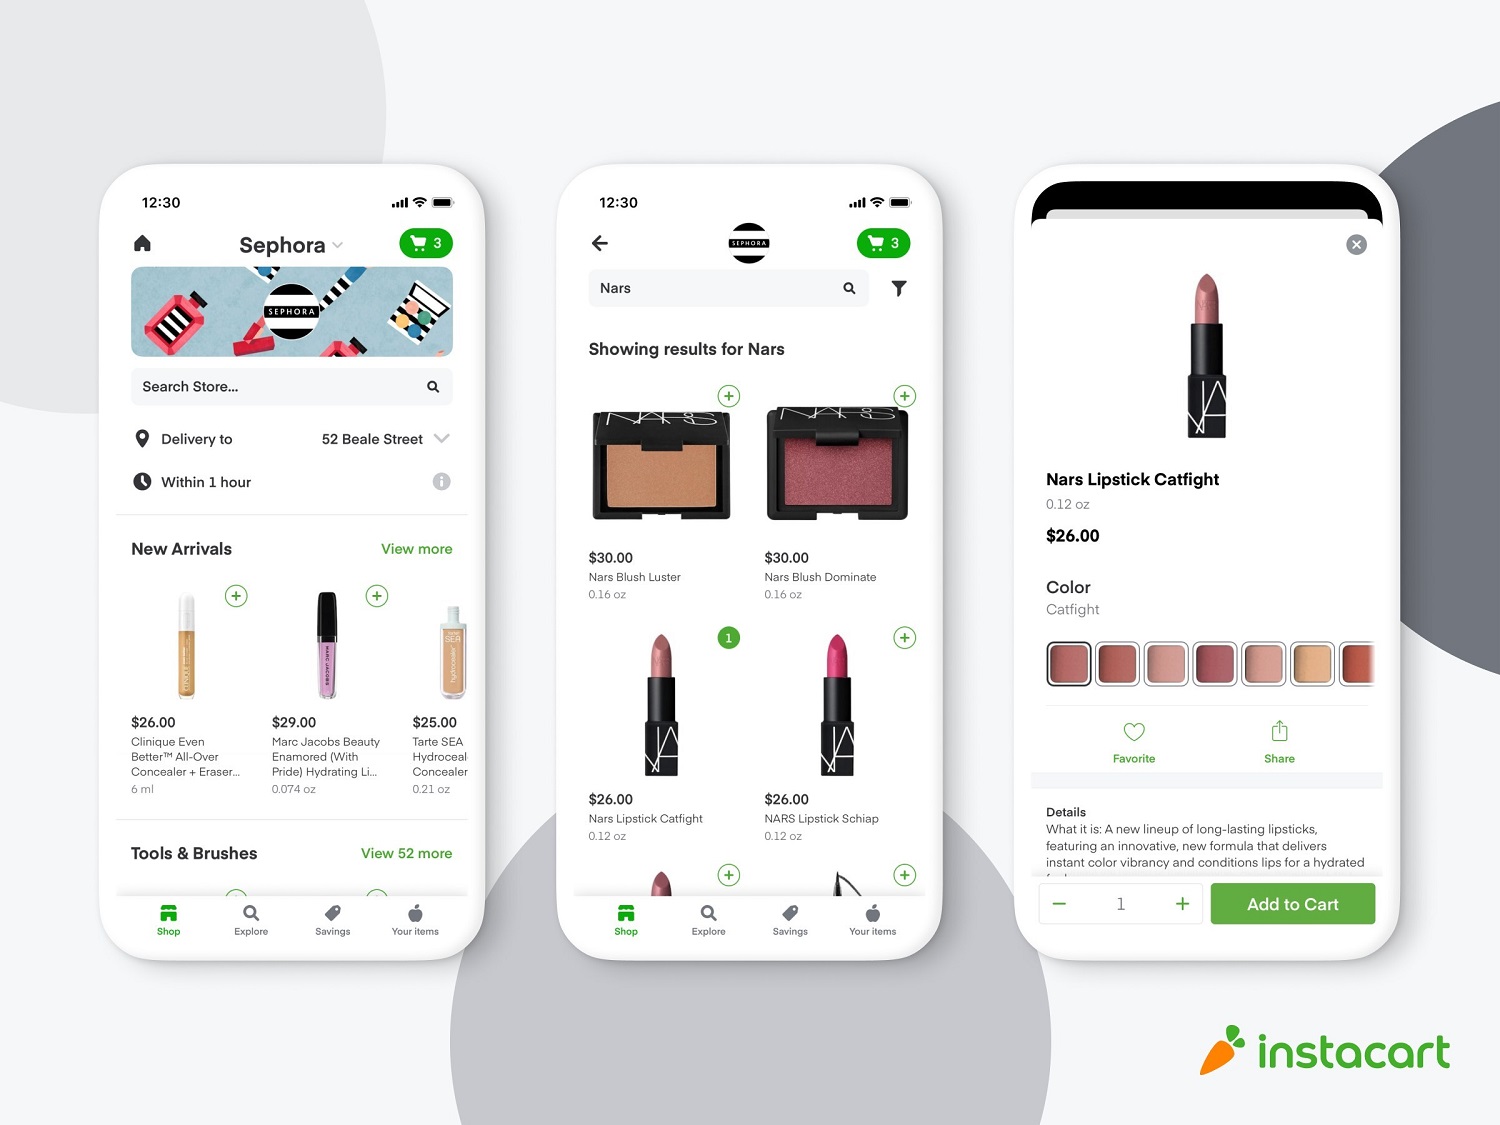 Instacart and Sephora Partner to Launch Same-day Delivery Across North America